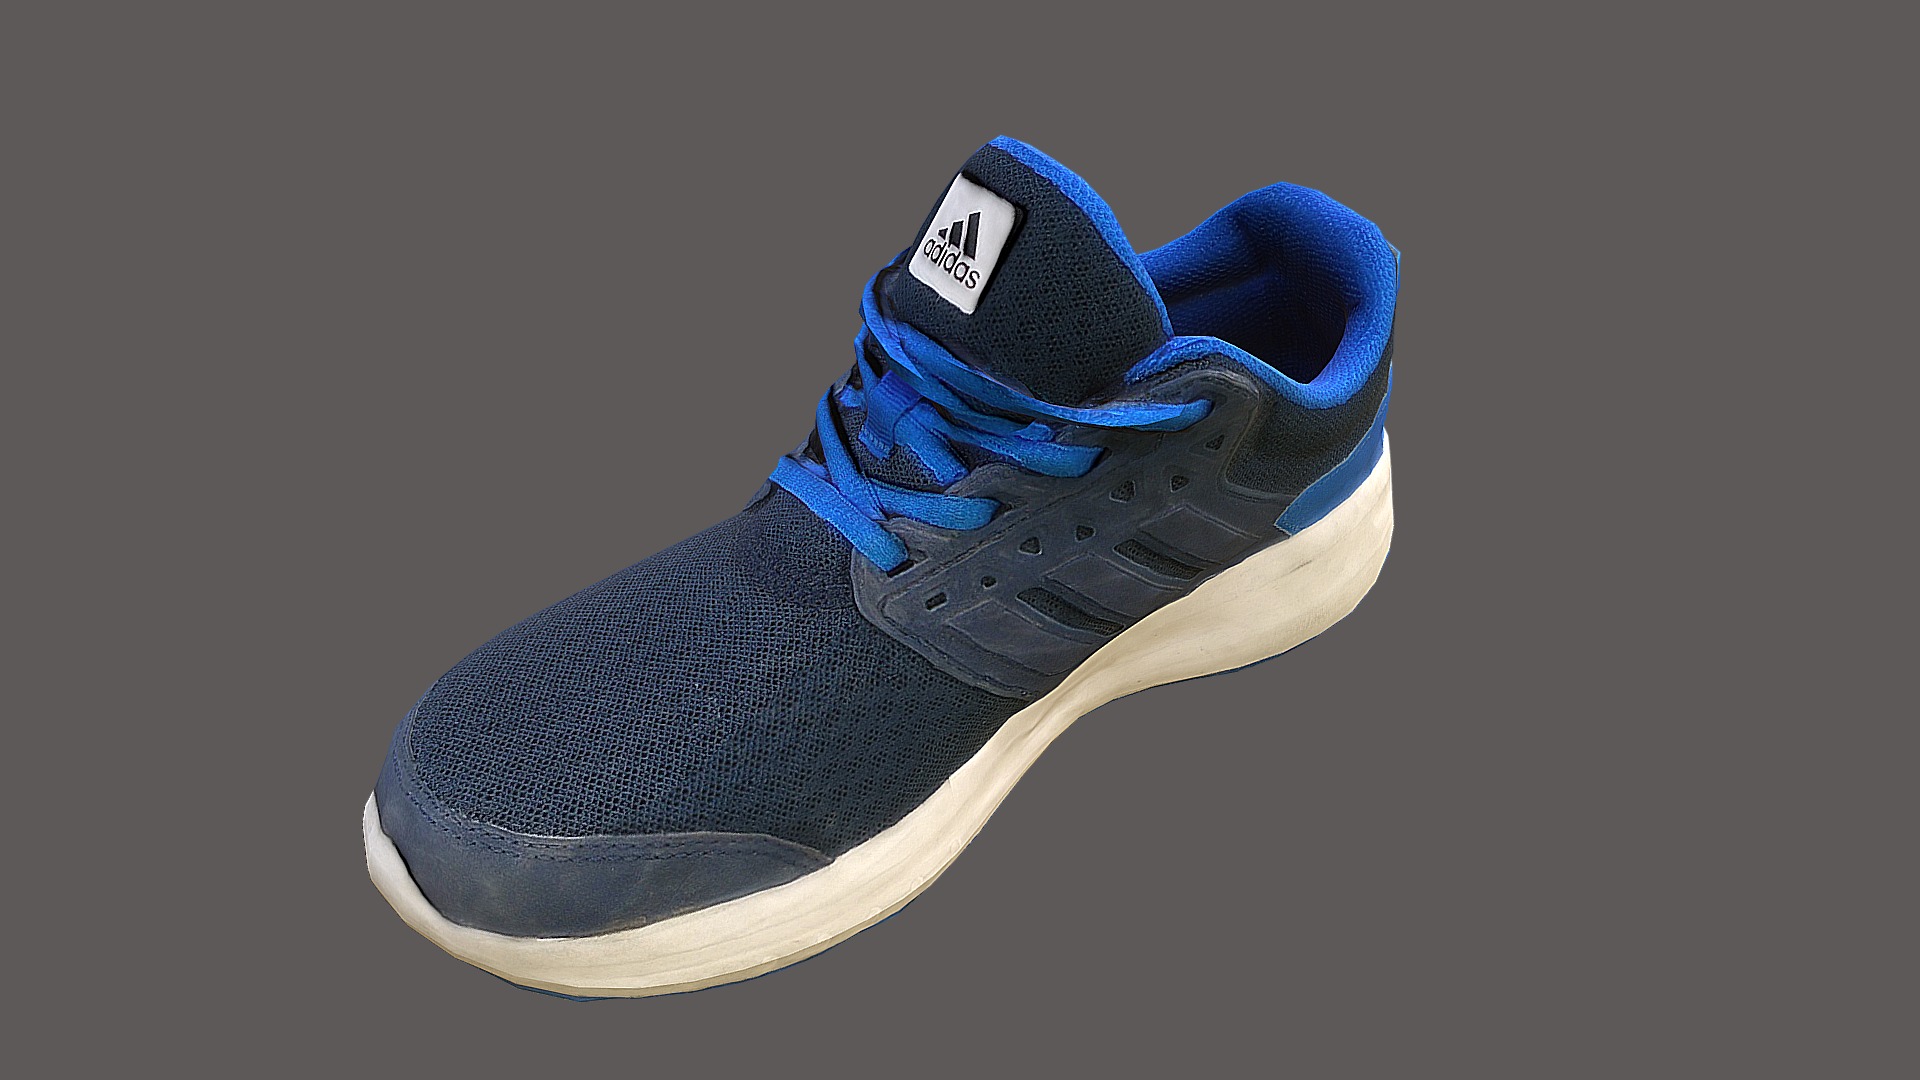 3D model Sneaker low poly model - This is a 3D model of the Sneaker low poly model. The 3D model is about a pair of blue shoes.